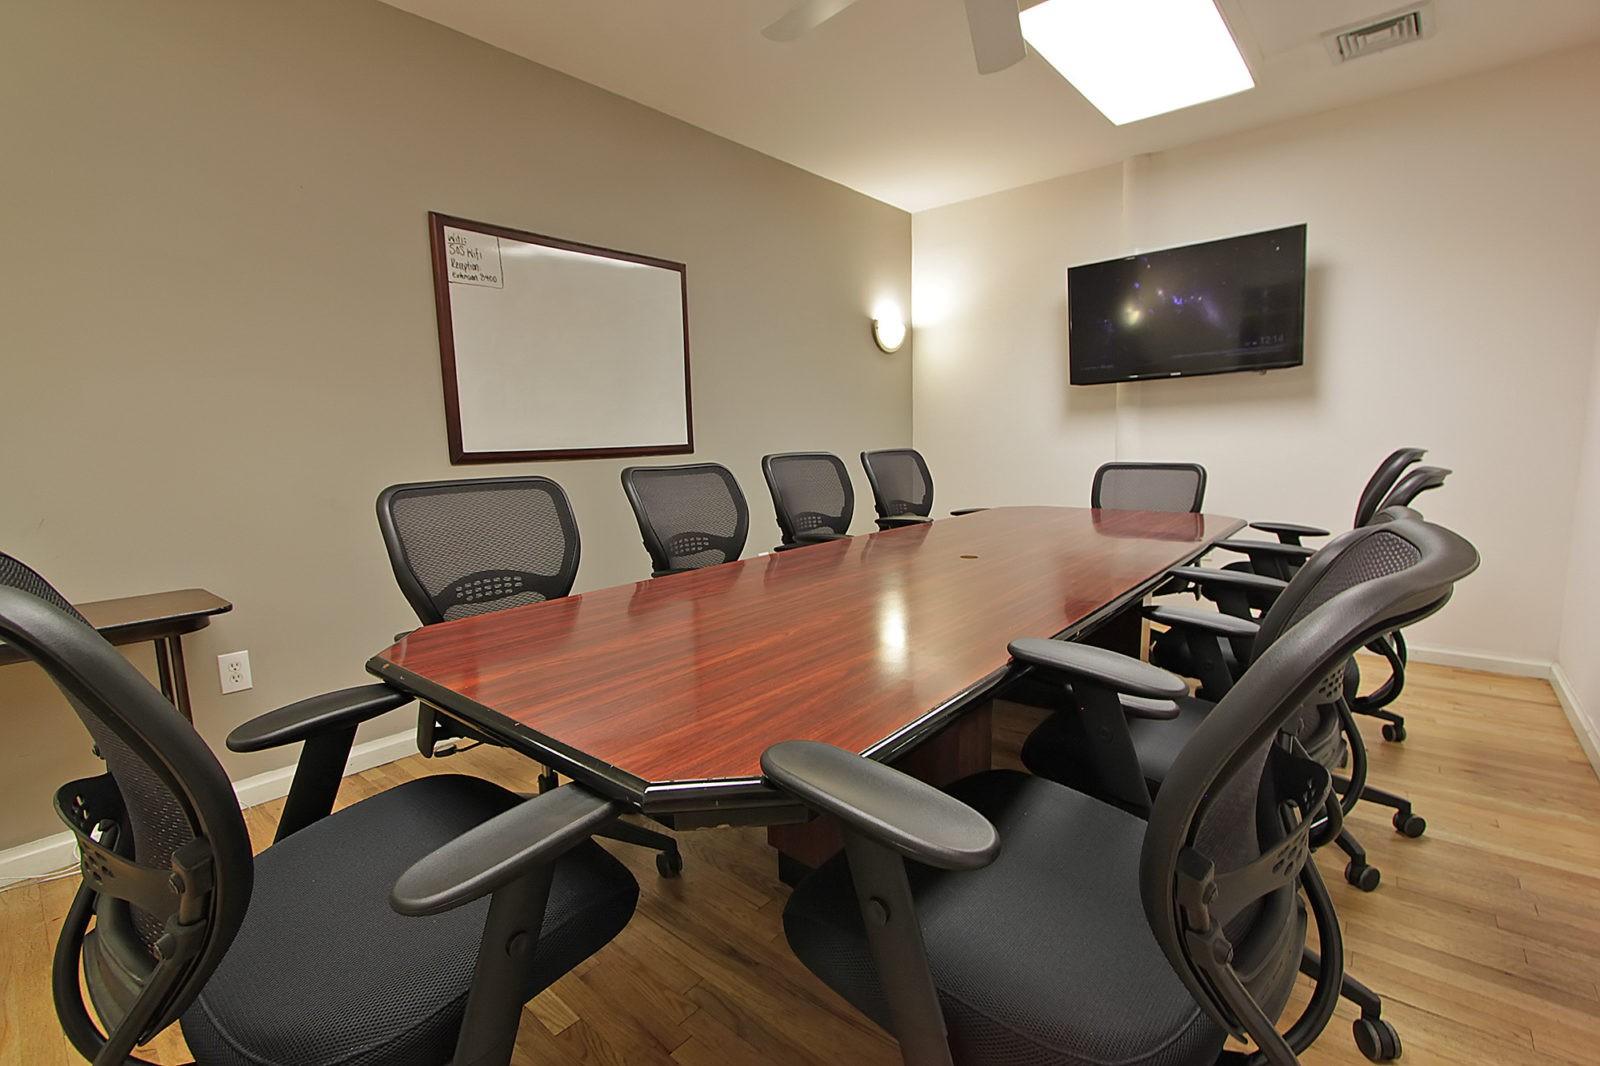 116 West 23rd Street New York NY Conference room with A/V set